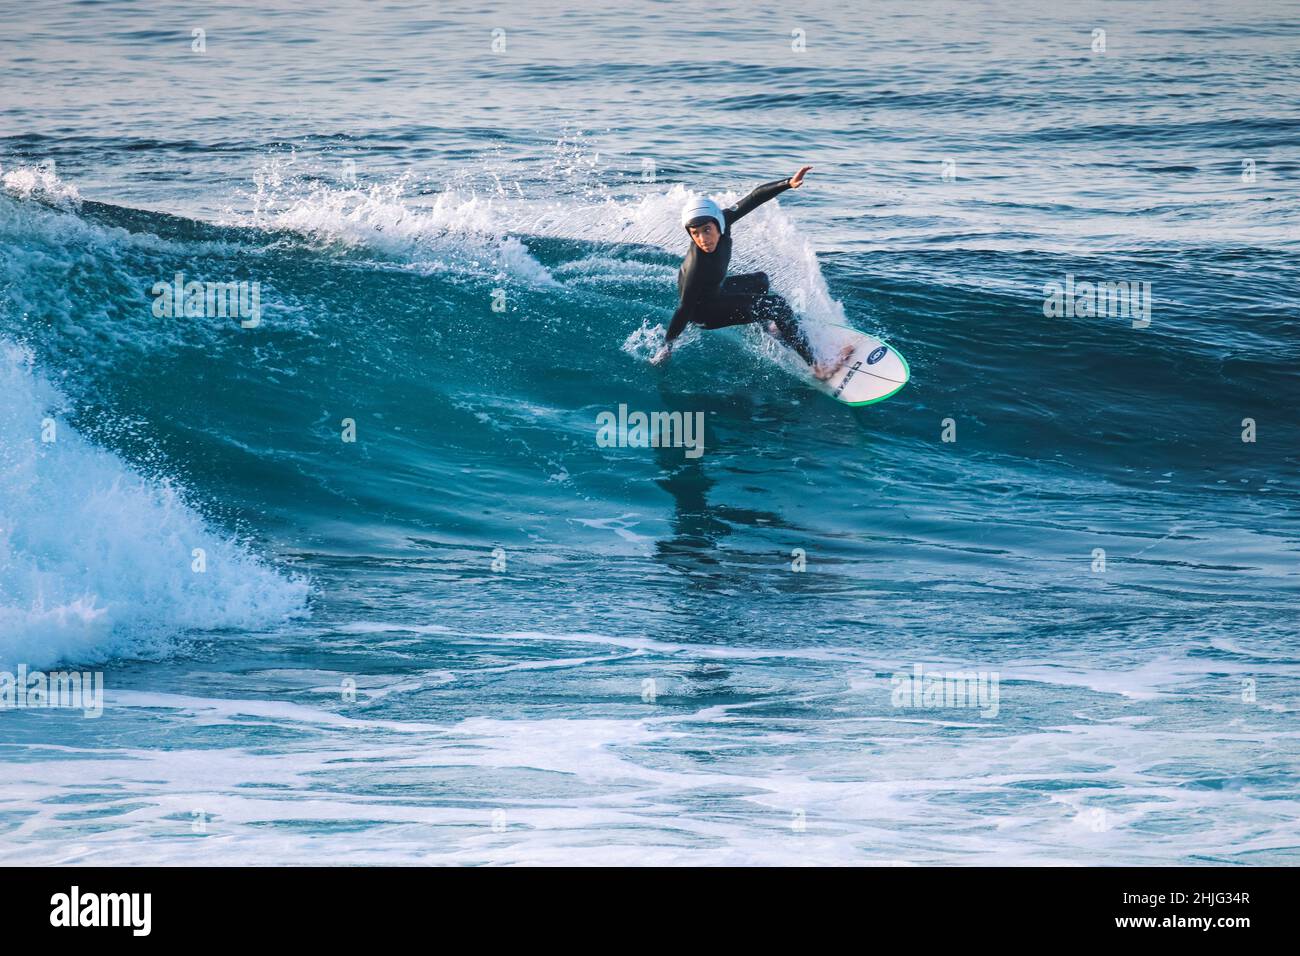 Surfer makes a maneuver in a perfect wave at the sunset Stock Photo